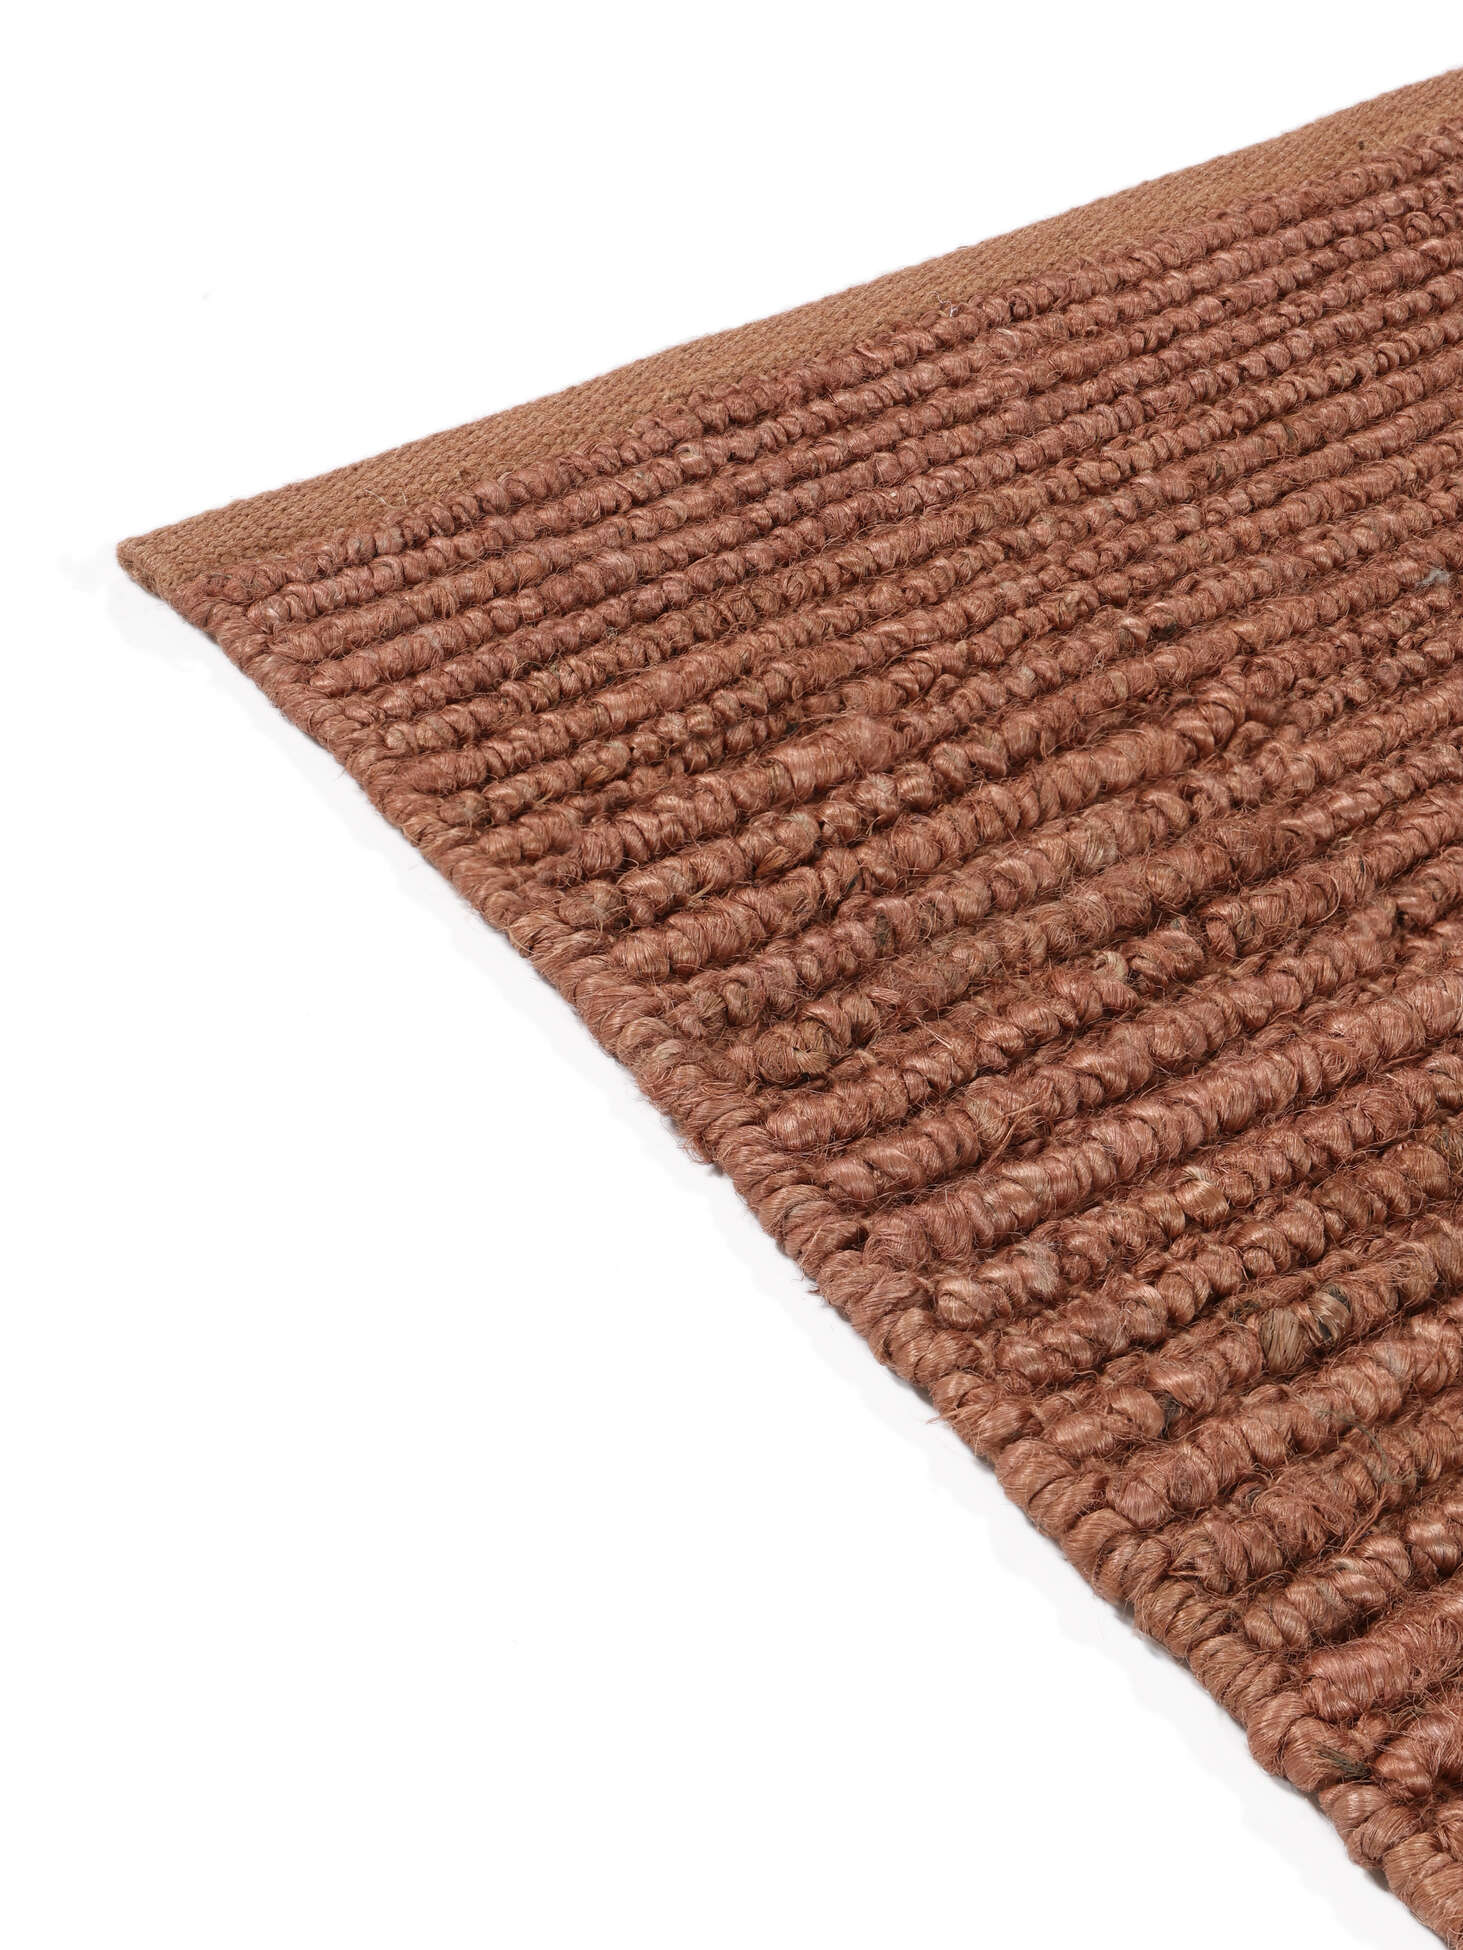 
    Jute Ribbed - Copper red - 200 x 300 cm
  